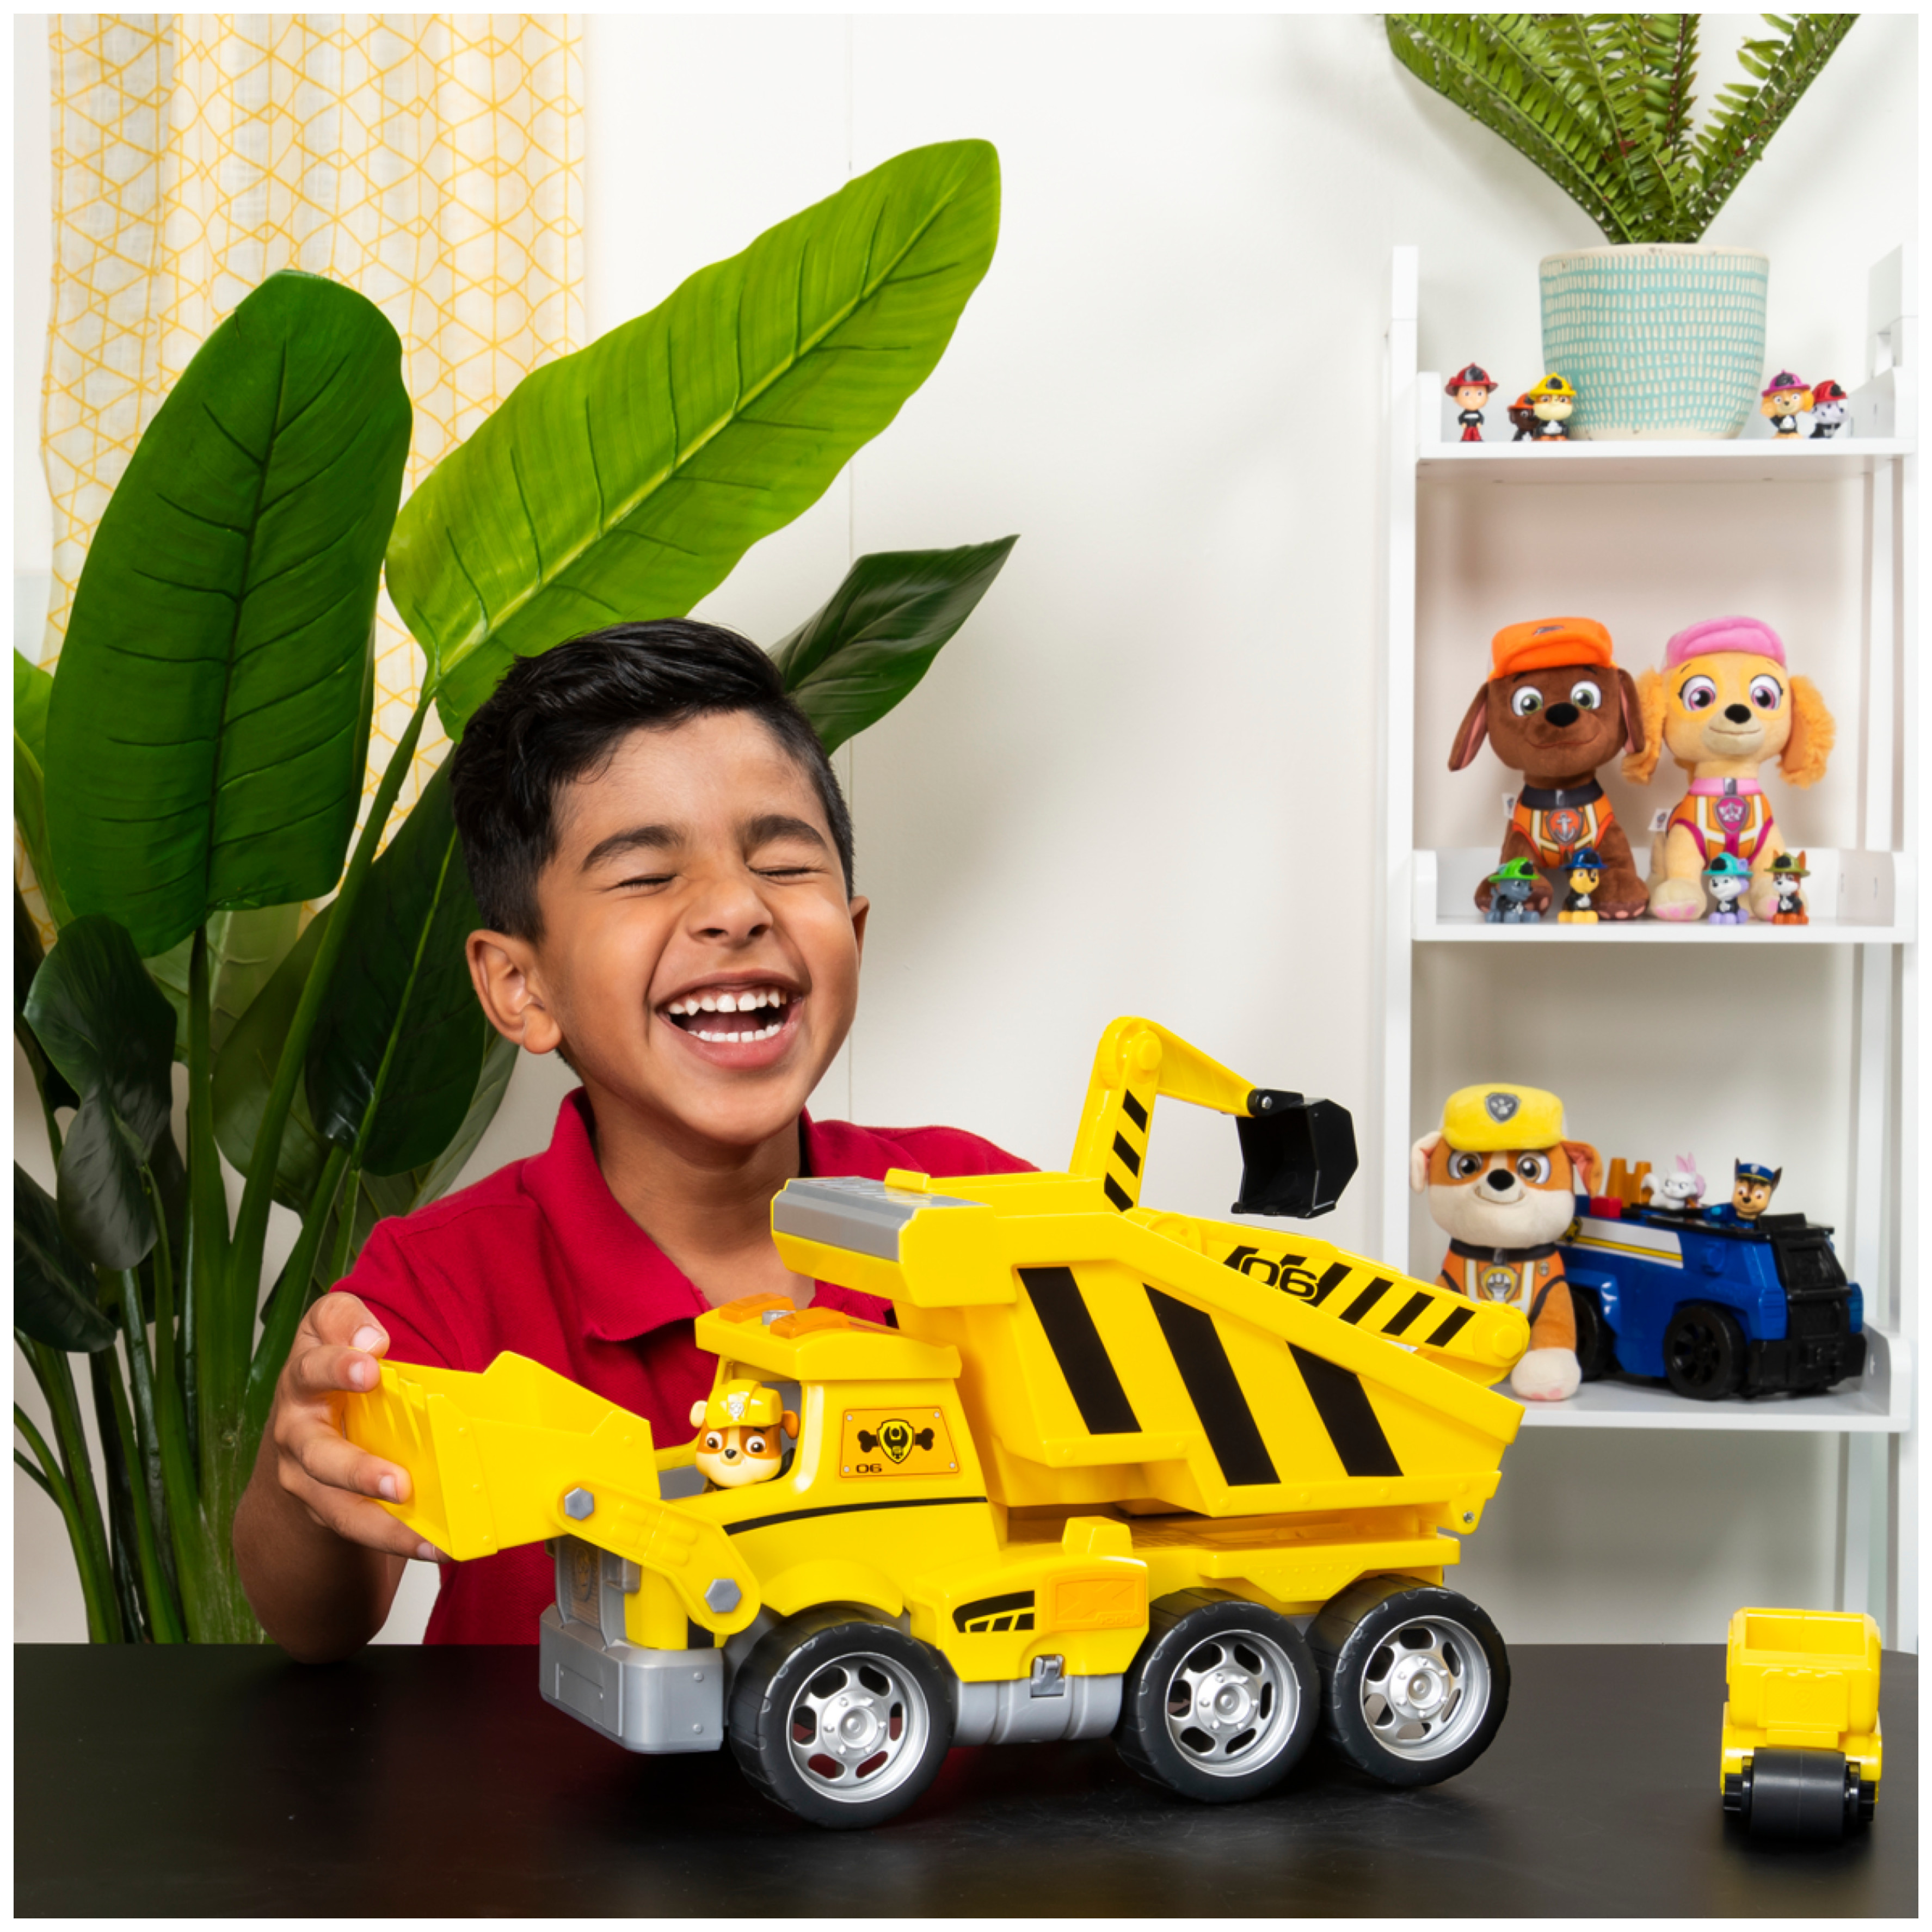 PAW Patrol, Rubble's Construction Truck with Mini Vehicle and Figure, For Ages 3 and up - image 3 of 8